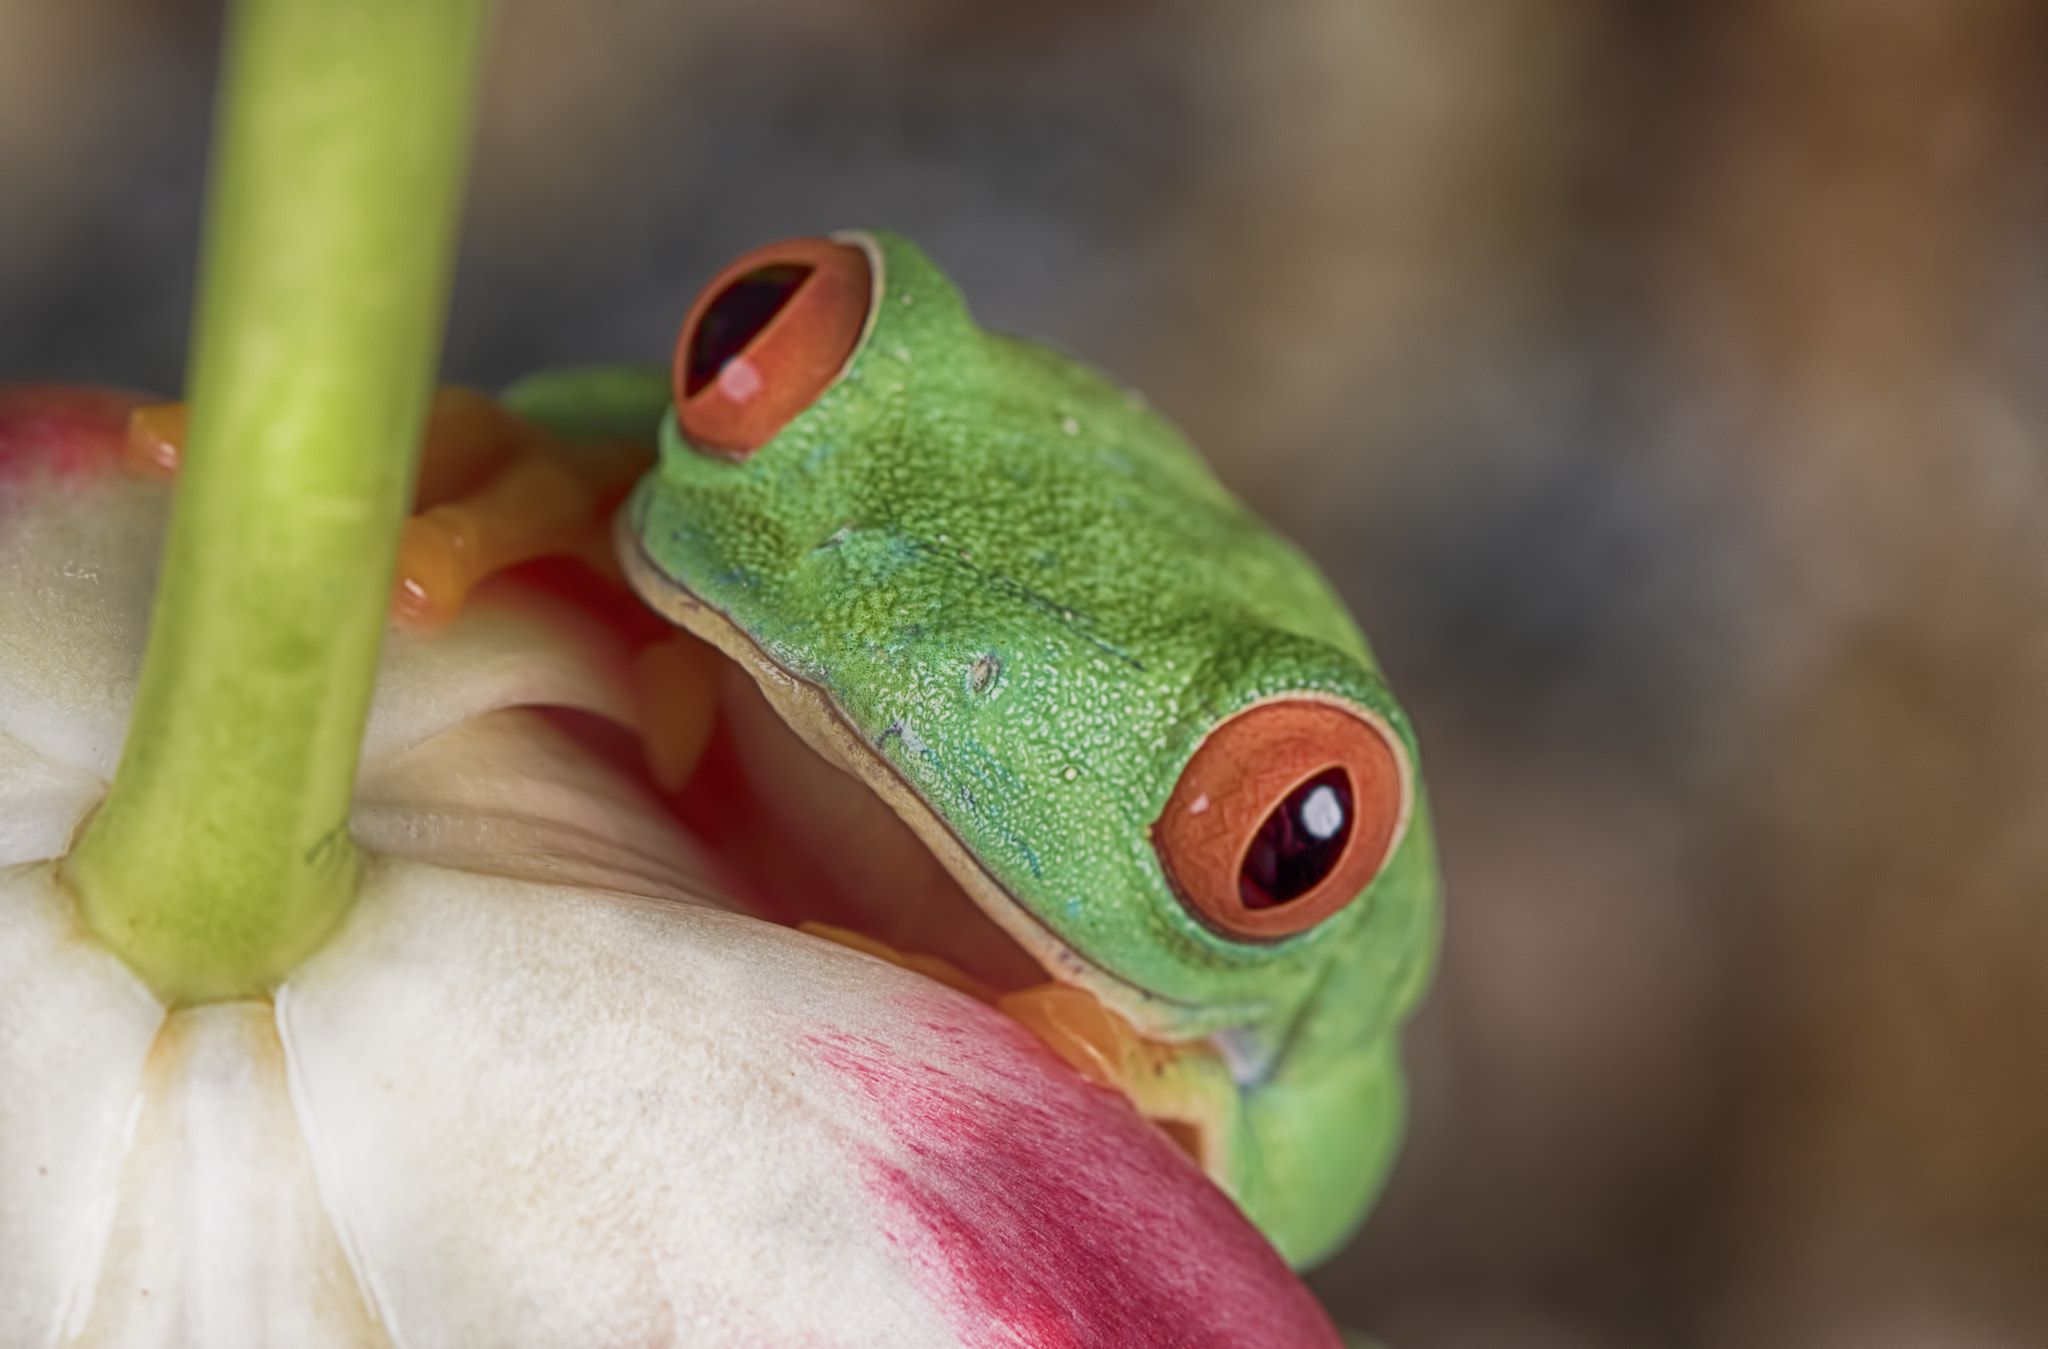 Red eye - Stunning little red eye tree frog up Close | Tree frogs ...